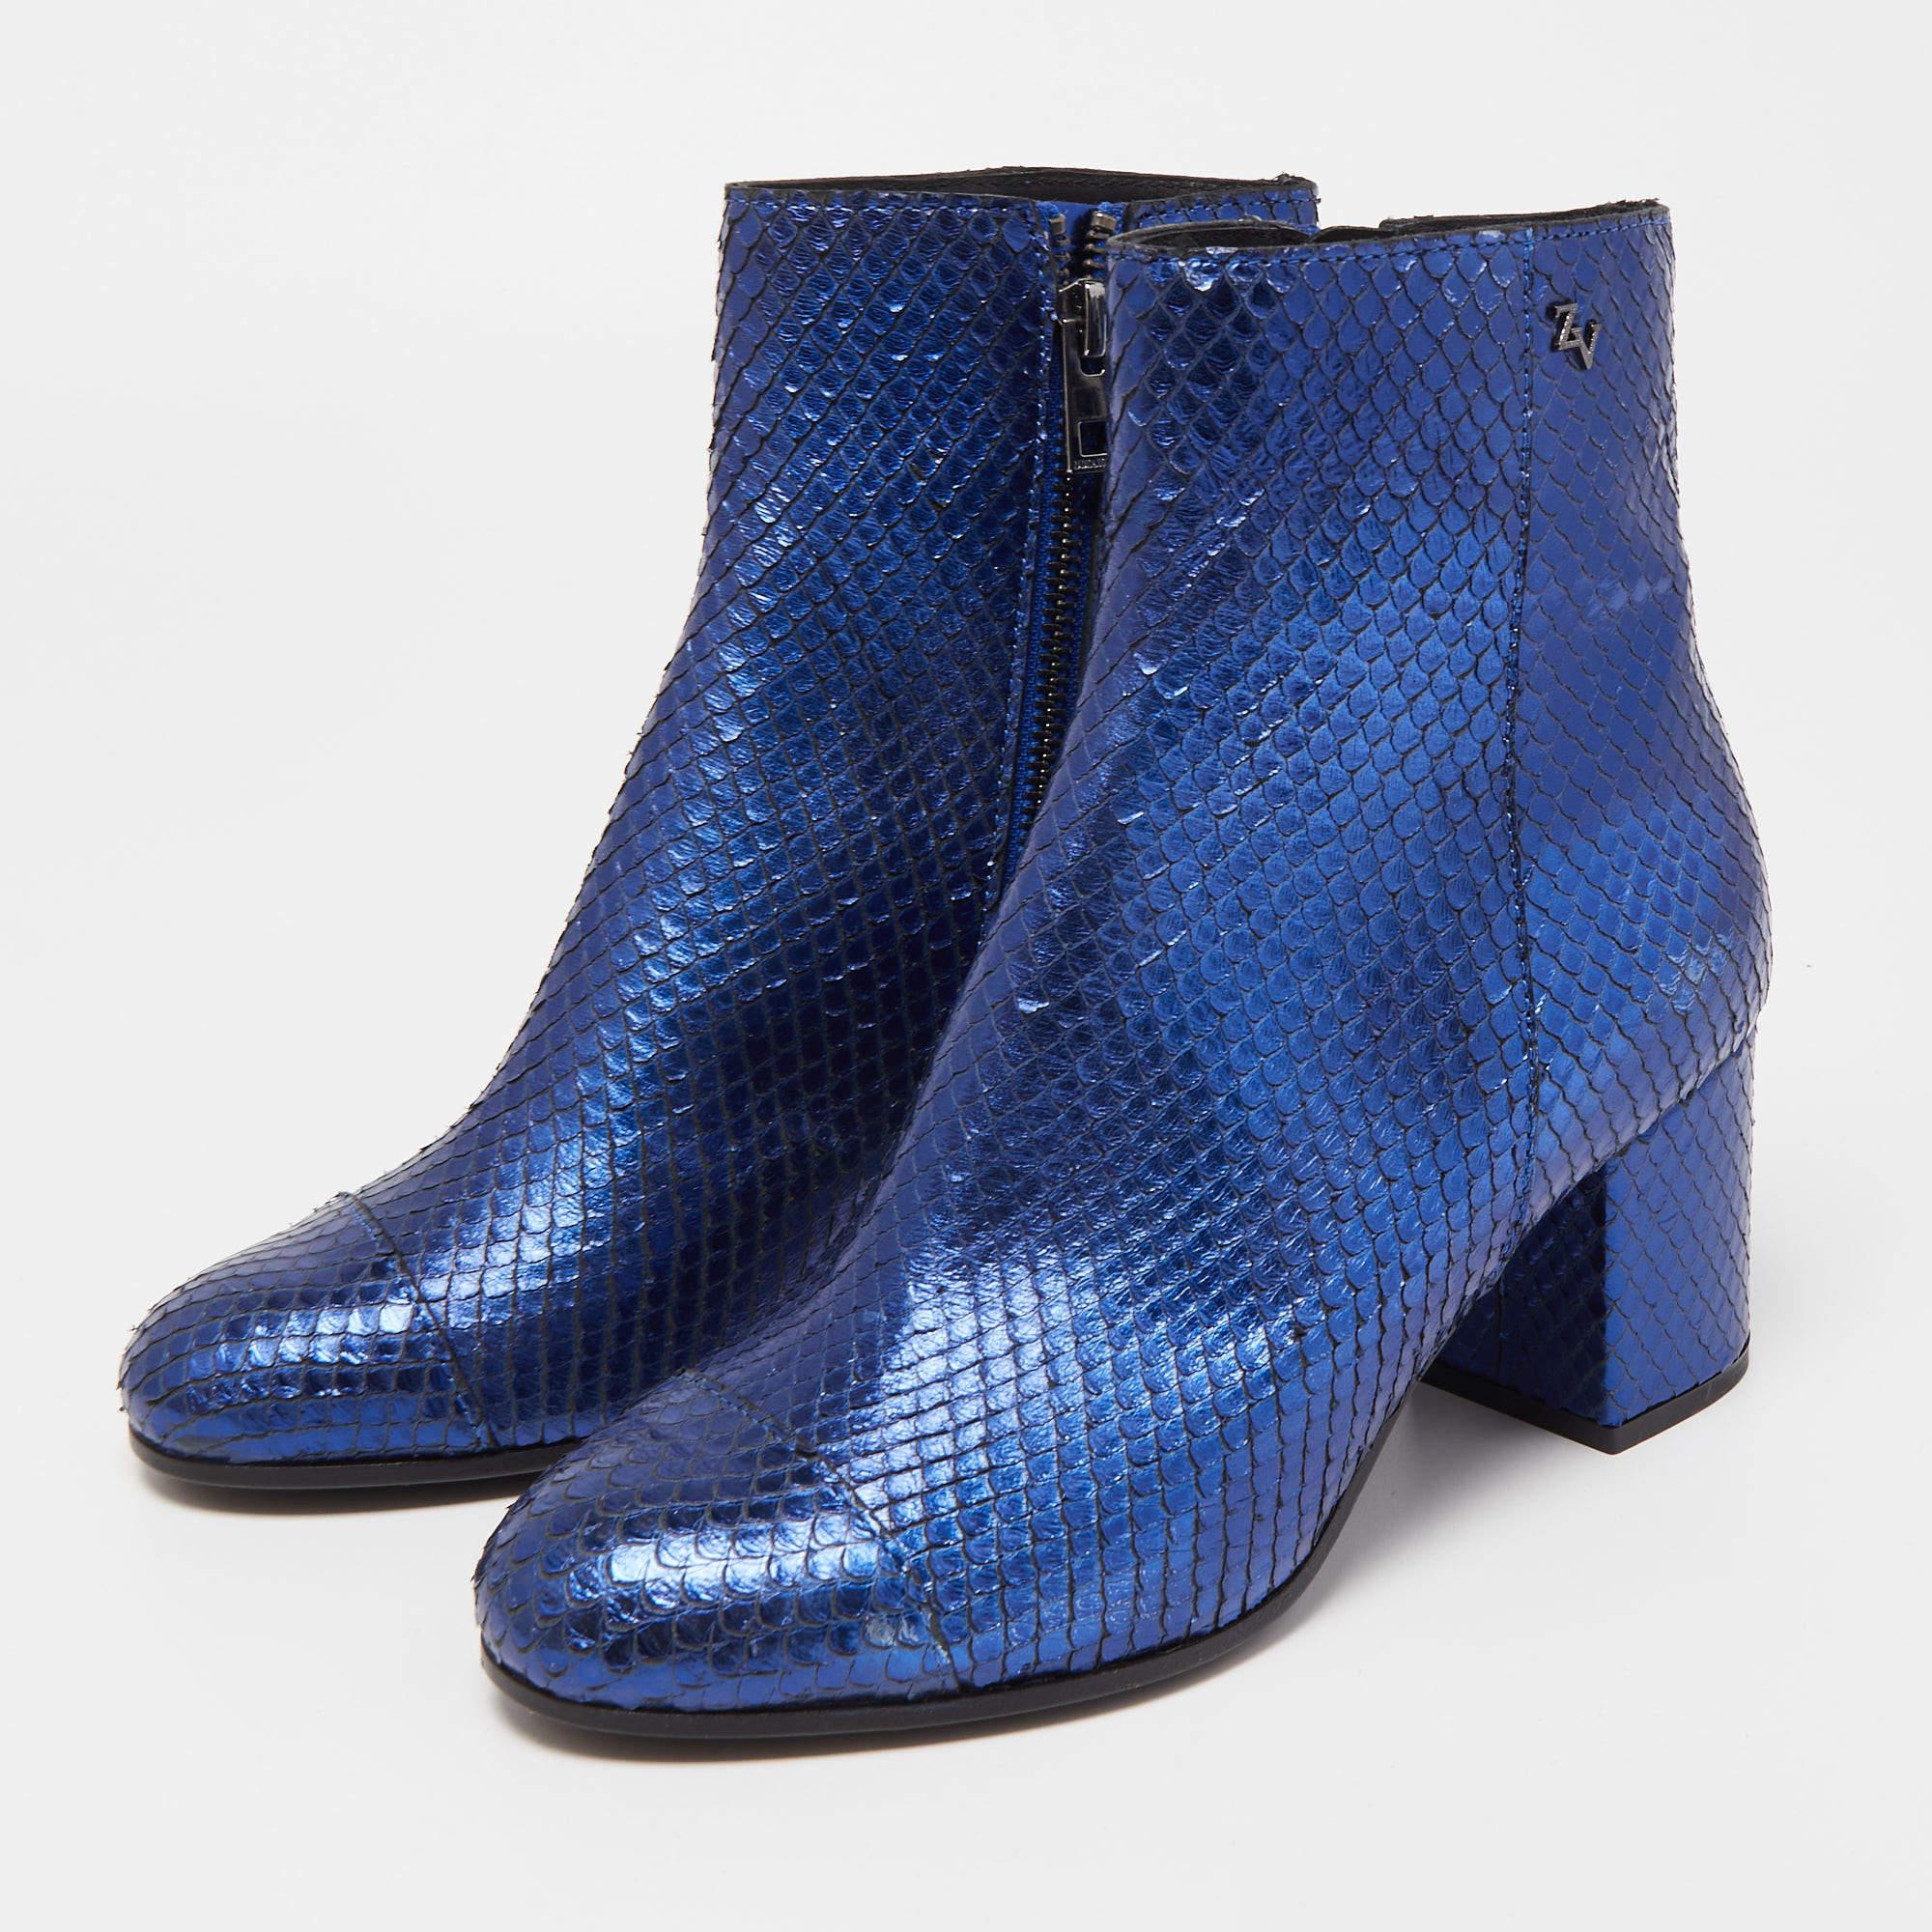 Zadig & Voltaire Blue Python Embossed Leather Block Heel Ankle Booties Size 36 For Sale 1